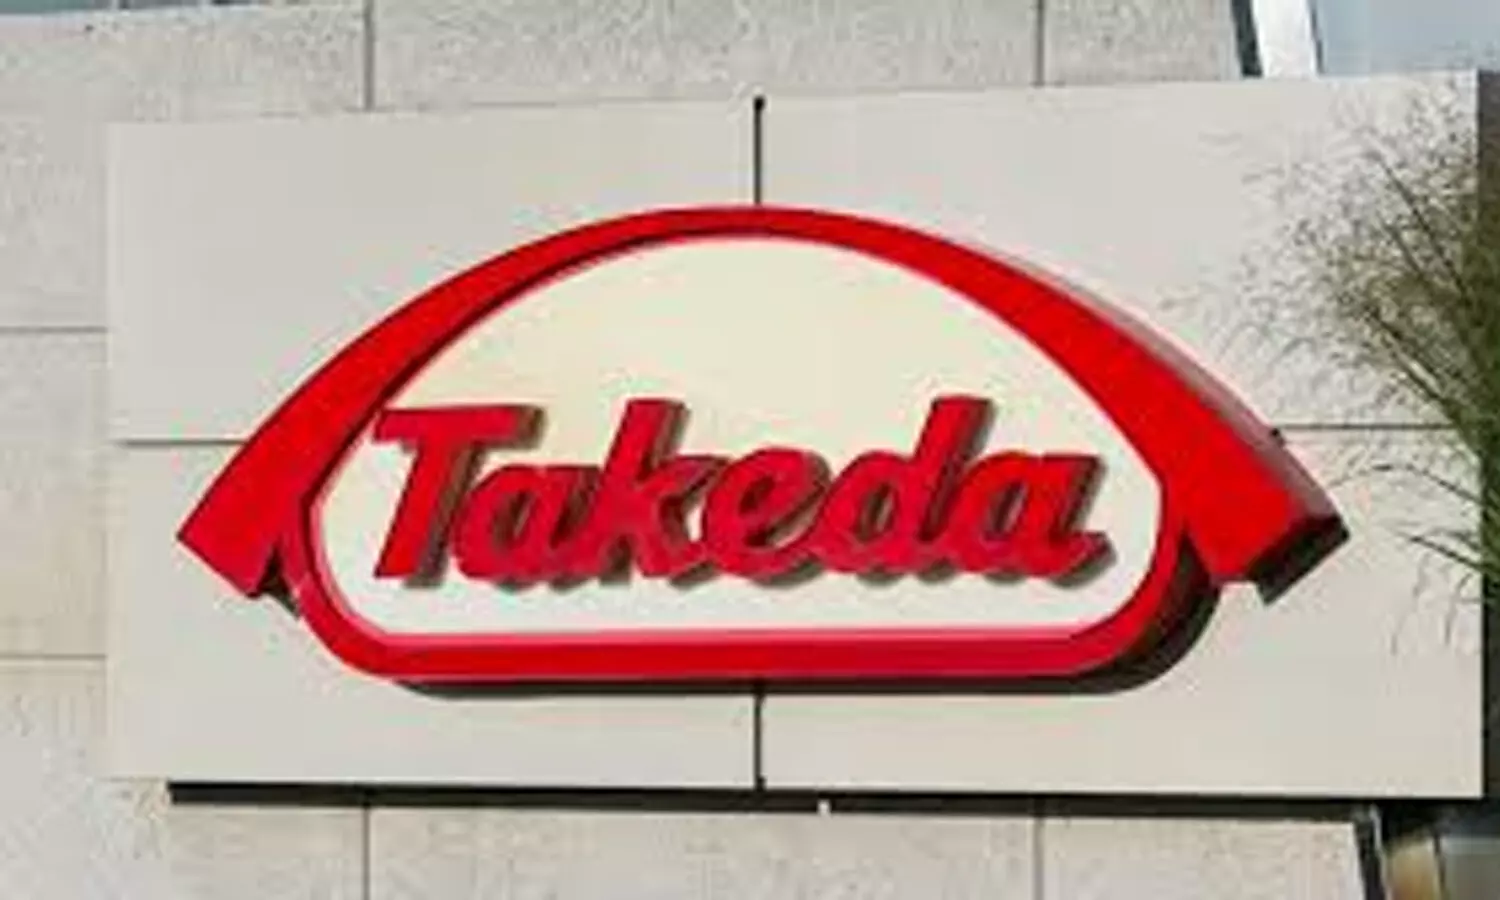 Takeda Pharma Chief asks transparency in virus vaccine rollout